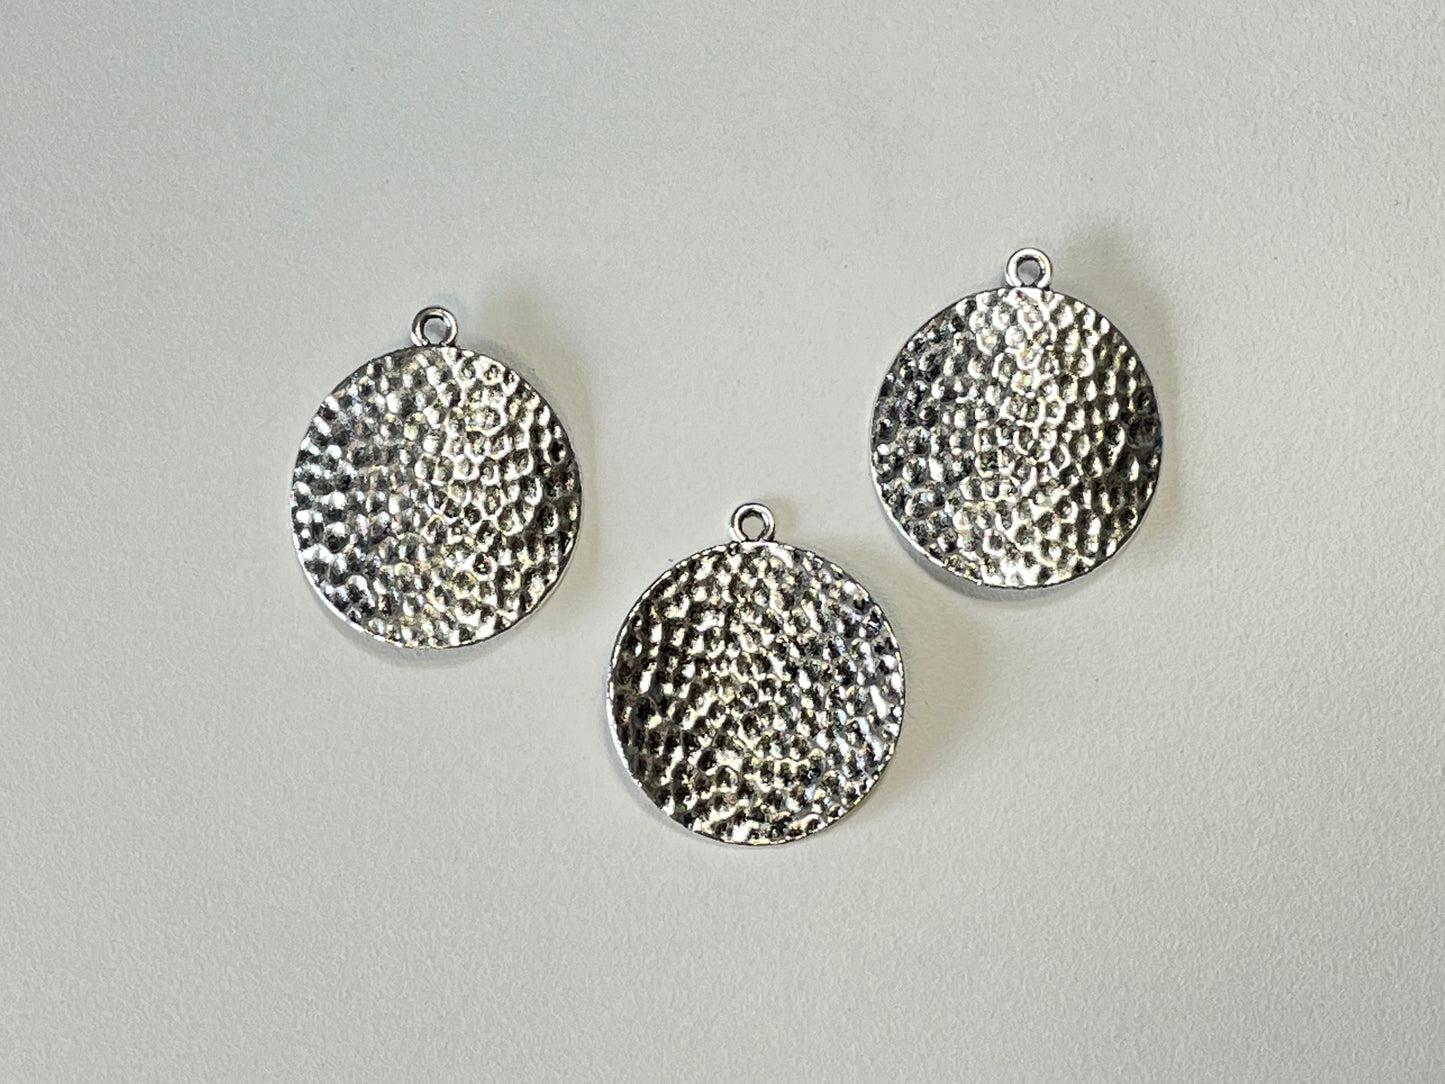 Hammered finish antique silver or gold finish pendant / earring connectors